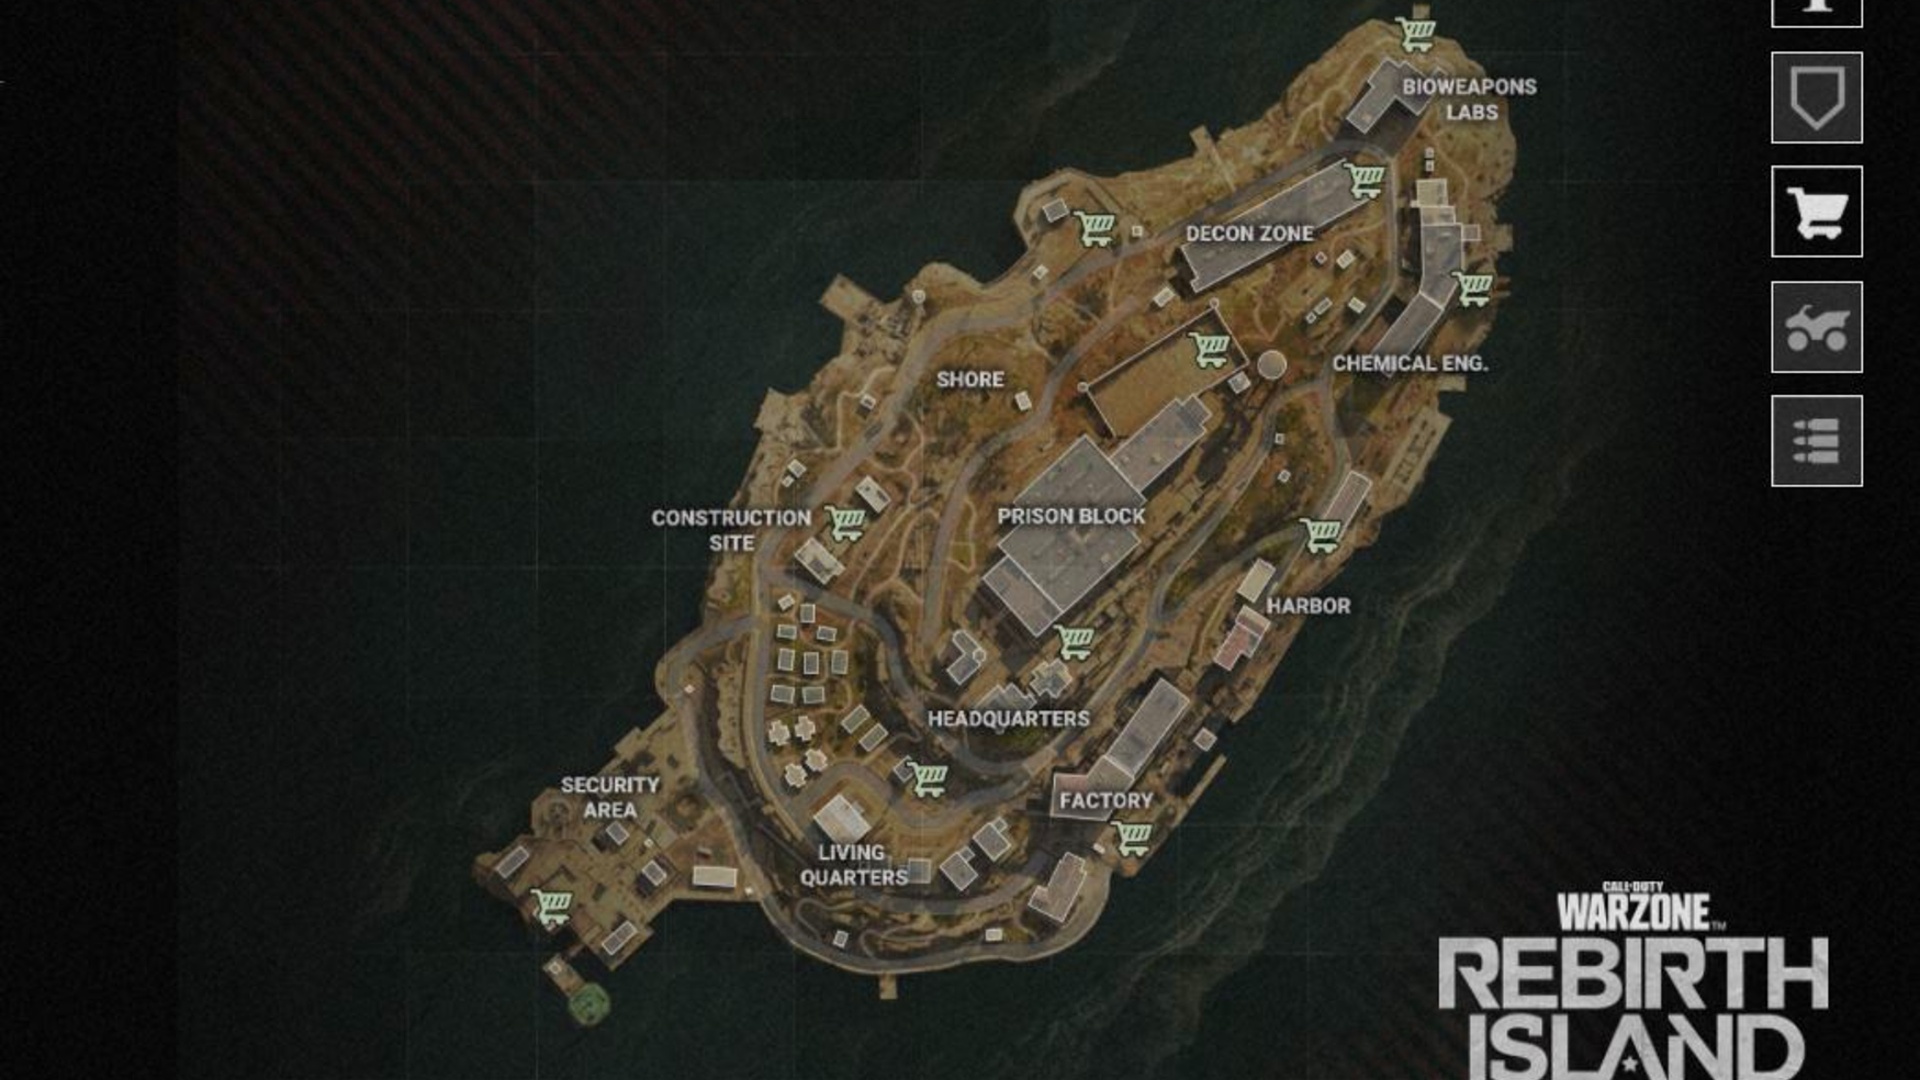 Call of Duty Warzone Rebirth Island guide the best places to drop and